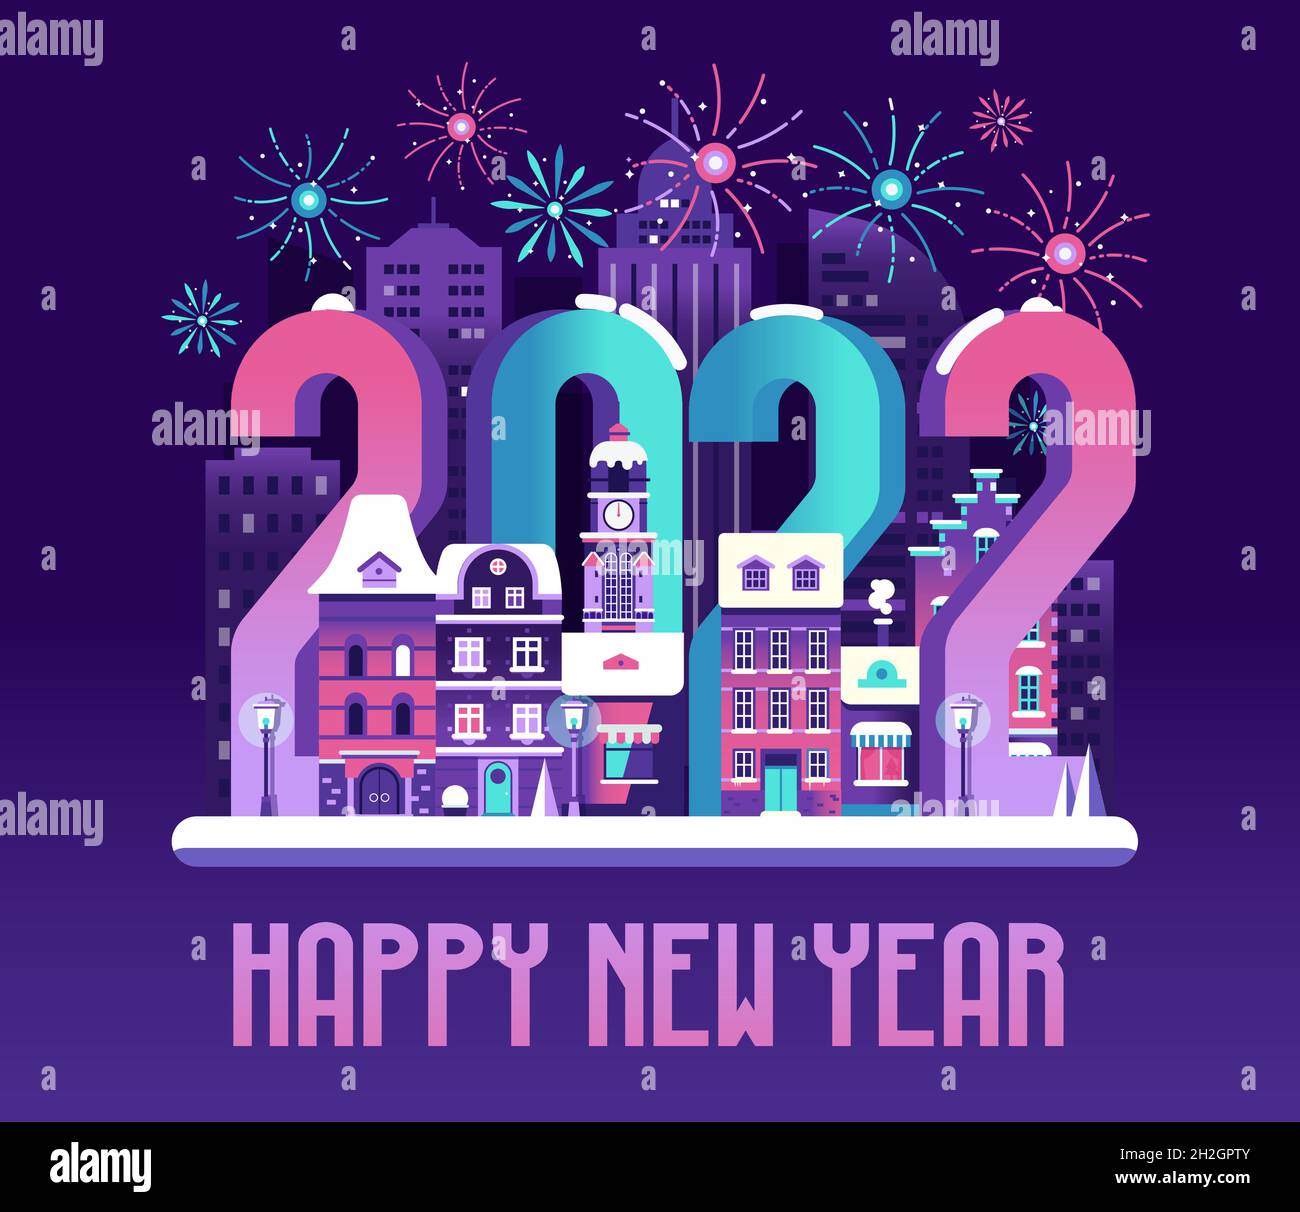 2022 Happy New Year Eve Scene with Fireworks Stock Vector